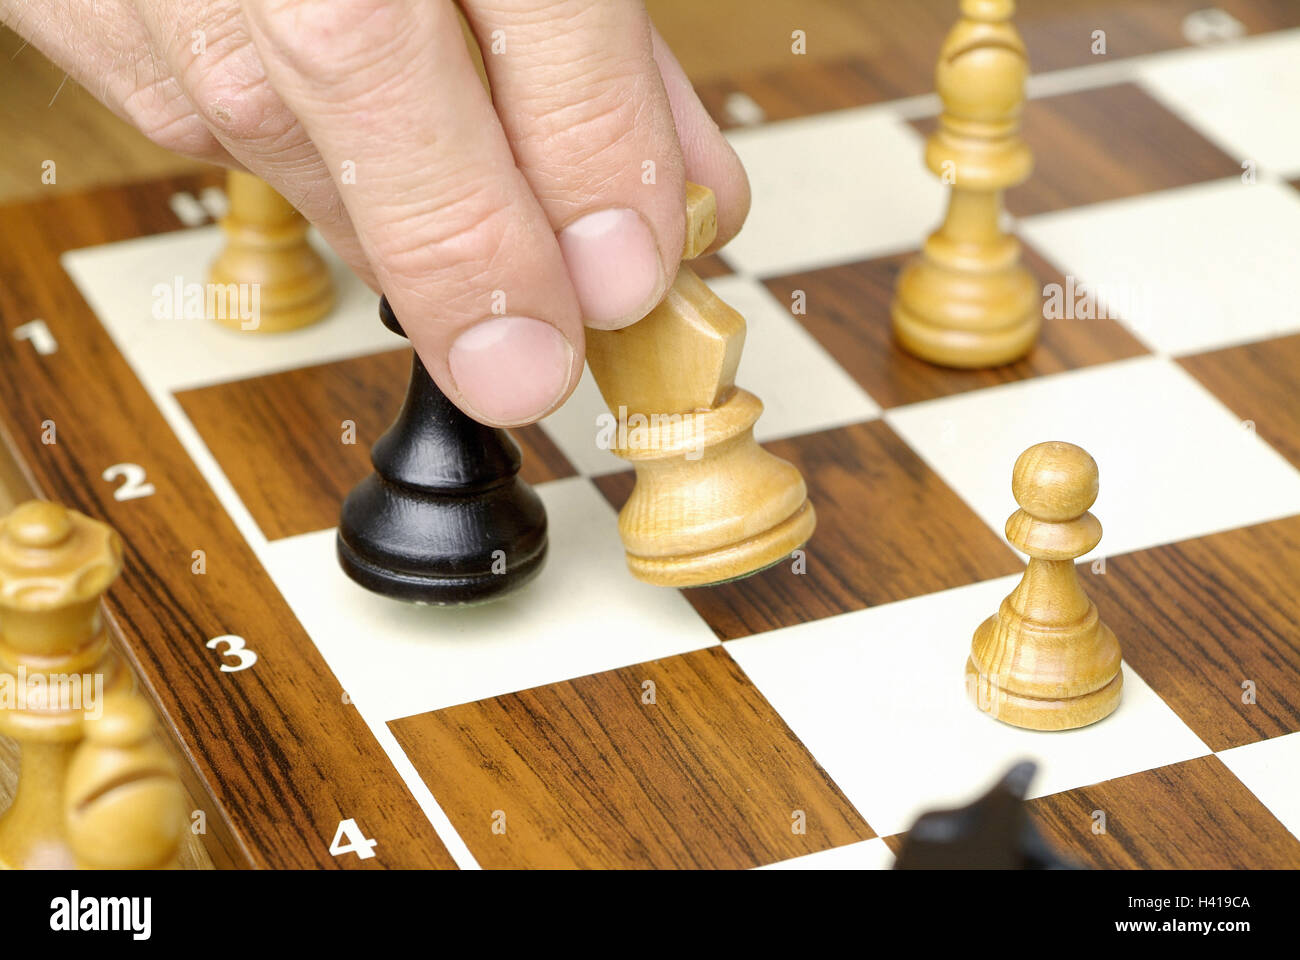 Chess, man's hand, characters, move, successfully, man, detail, hand, 38 years, players, chess, parlour game, board game, board, game, chess, strategy, strategy game, tactics, mental exercise, leisure time, hobby, game of chess, chess pieces, manoeuvre, 3 Stock Photo